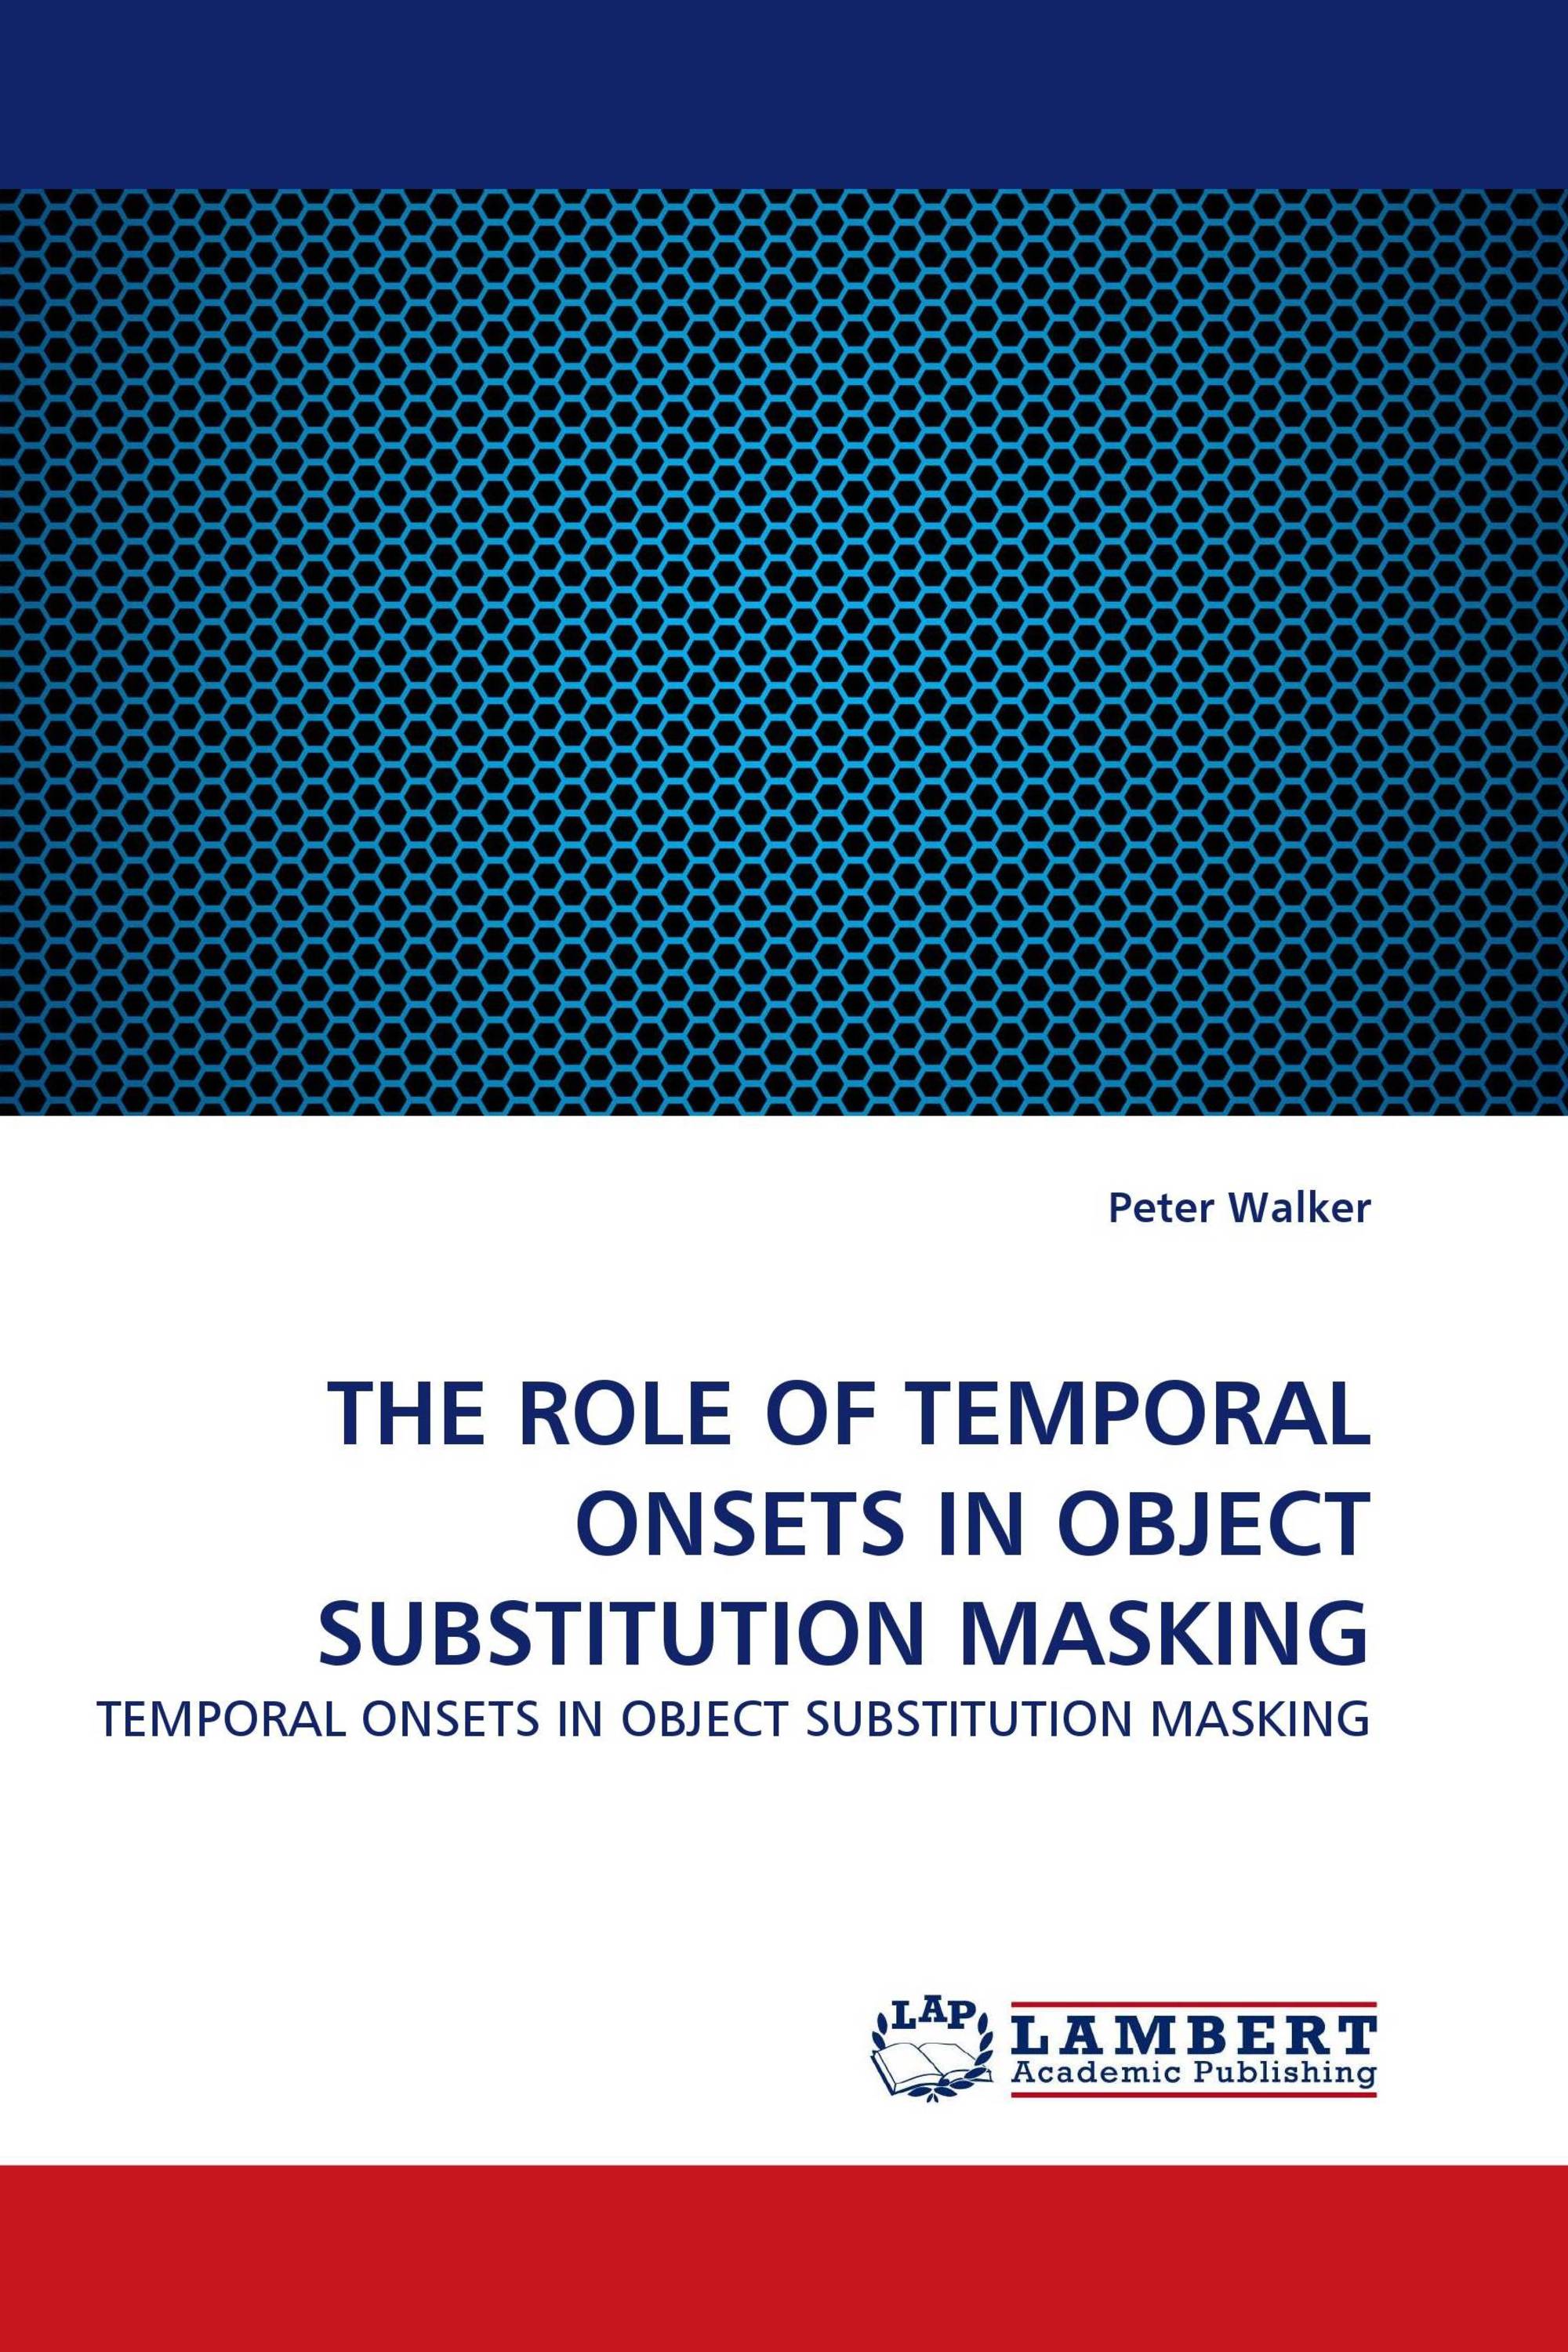 THE ROLE OF TEMPORAL ONSETS IN OBJECT SUBSTITUTION MASKING